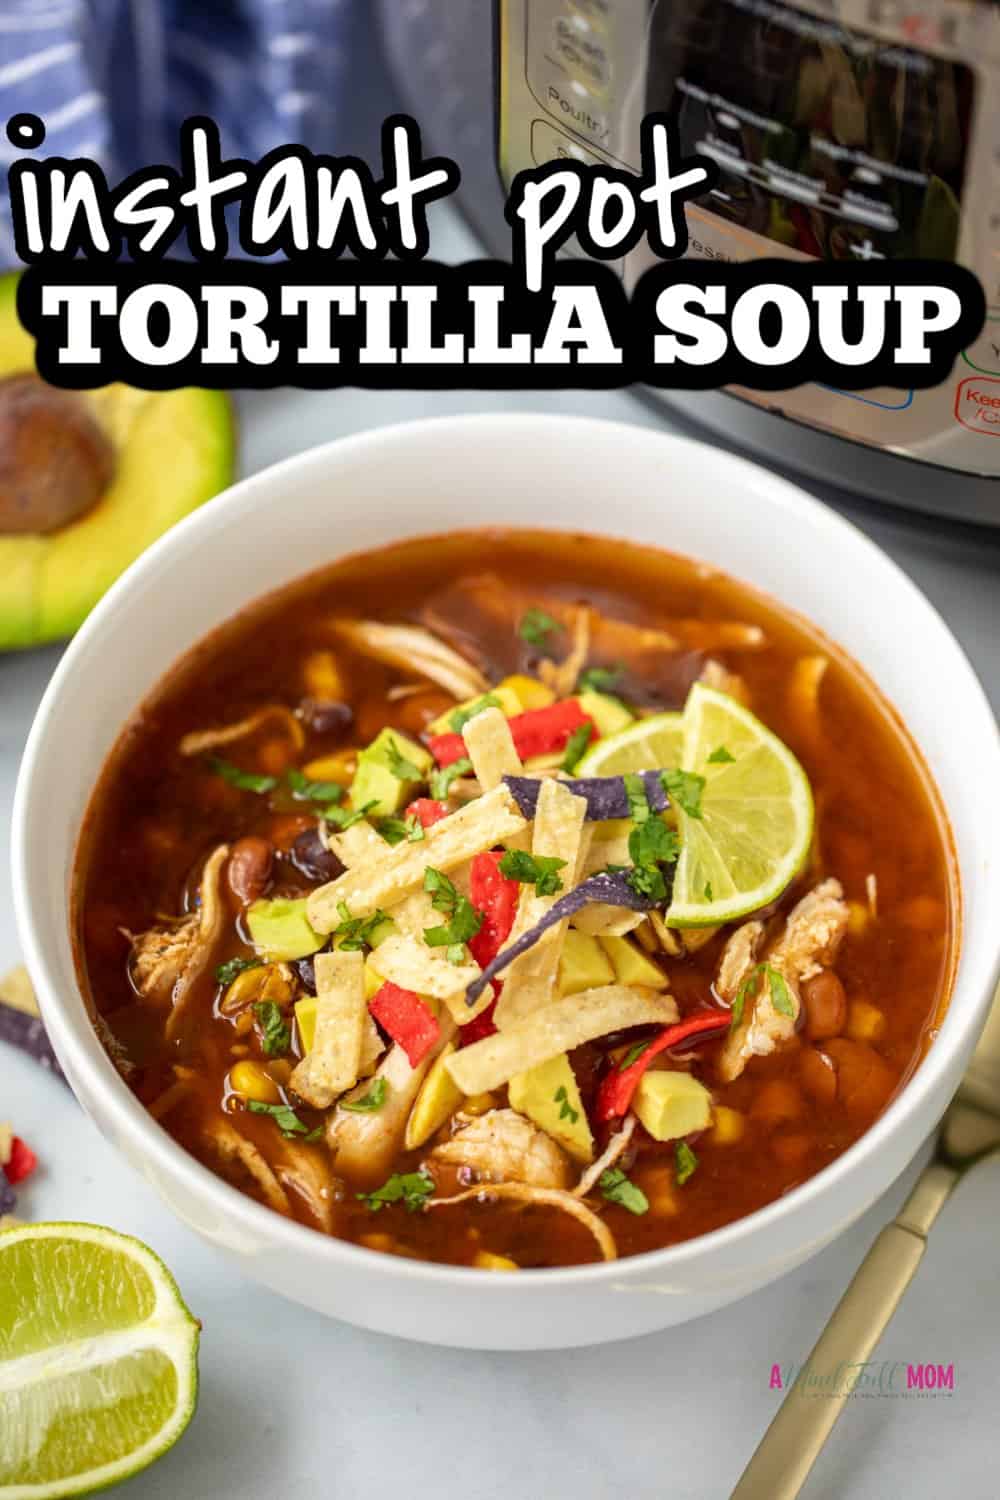 Instant Pot Chicken Tortilla Soup is an easy Instant Pot soup recipe that is loaded with flavor! Made with all the flavors of a classic chicken tortilla soup, this pressure cooker version comes together faster with more intense flavor. When the craving for Tortilla Soup hits, this recipe will satisfy your craving and comes together quickly. It is a healthy instant pot recipe that the entire family enjoys! 